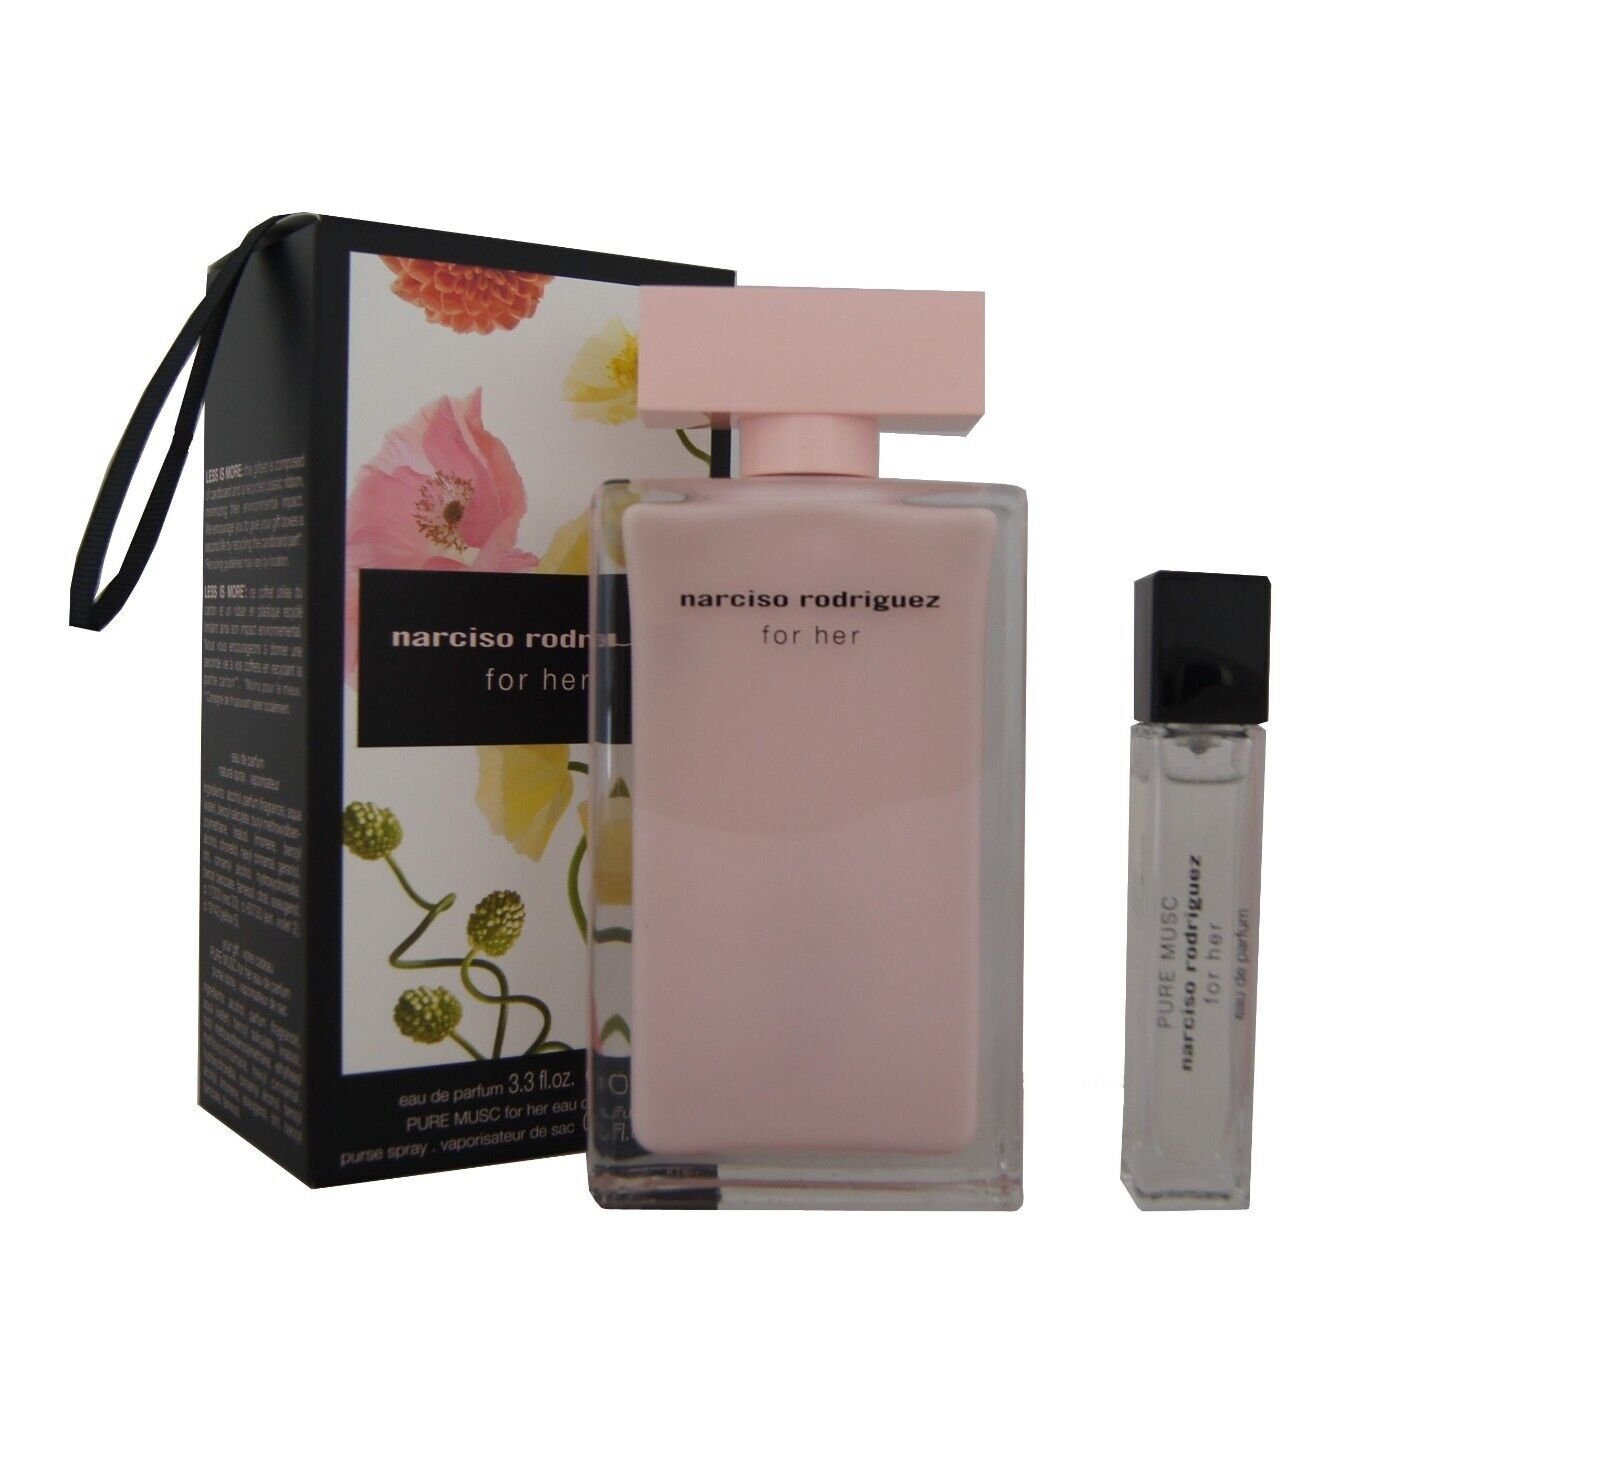 Narcisco Rodriguez EDP EDP For Pure 10ml, rodriguez 1-tlg. Duft-Set narciso 100ml Her Musc Her For 